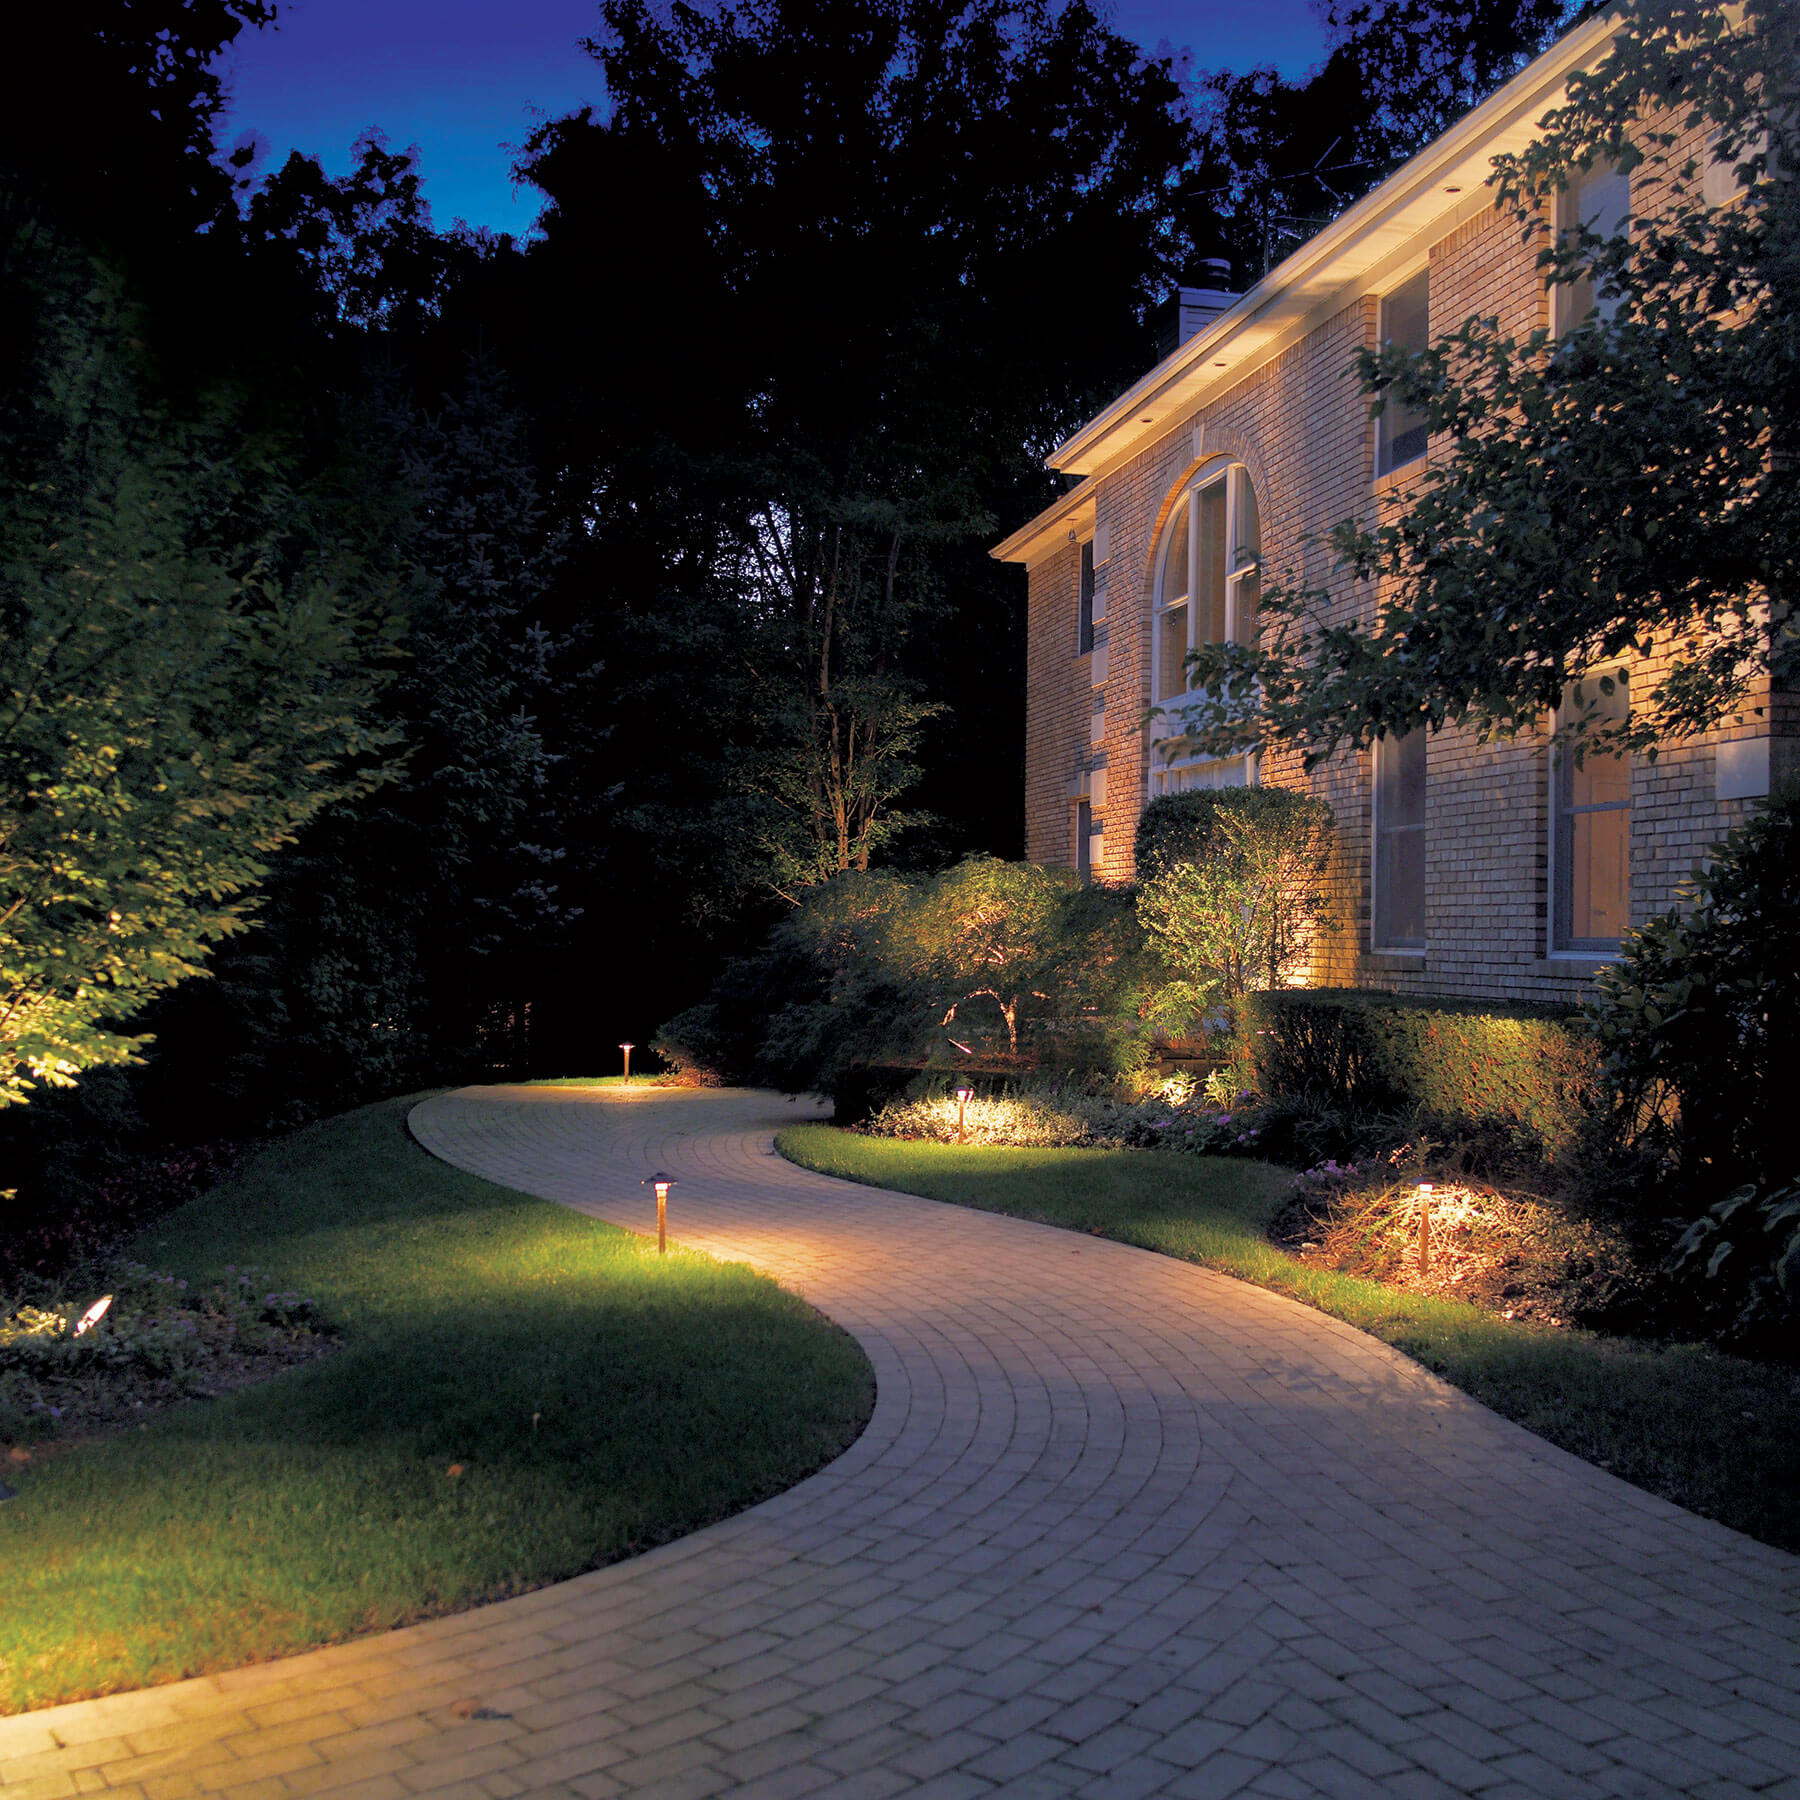 Pathway lighting and front of house